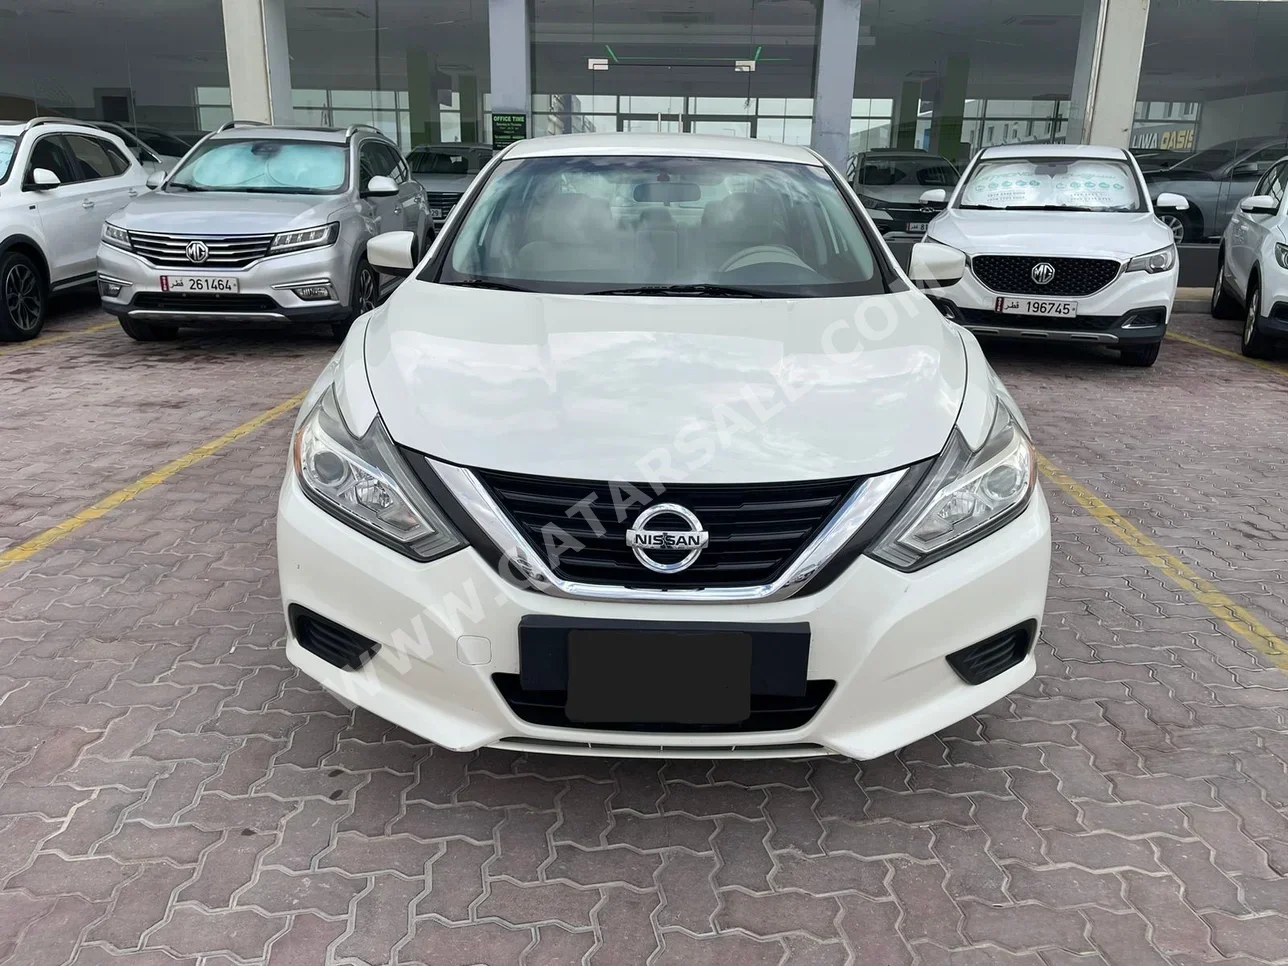 Nissan  Altima  2018  Automatic  42,000 Km  4 Cylinder  Front Wheel Drive (FWD)  Sedan  White